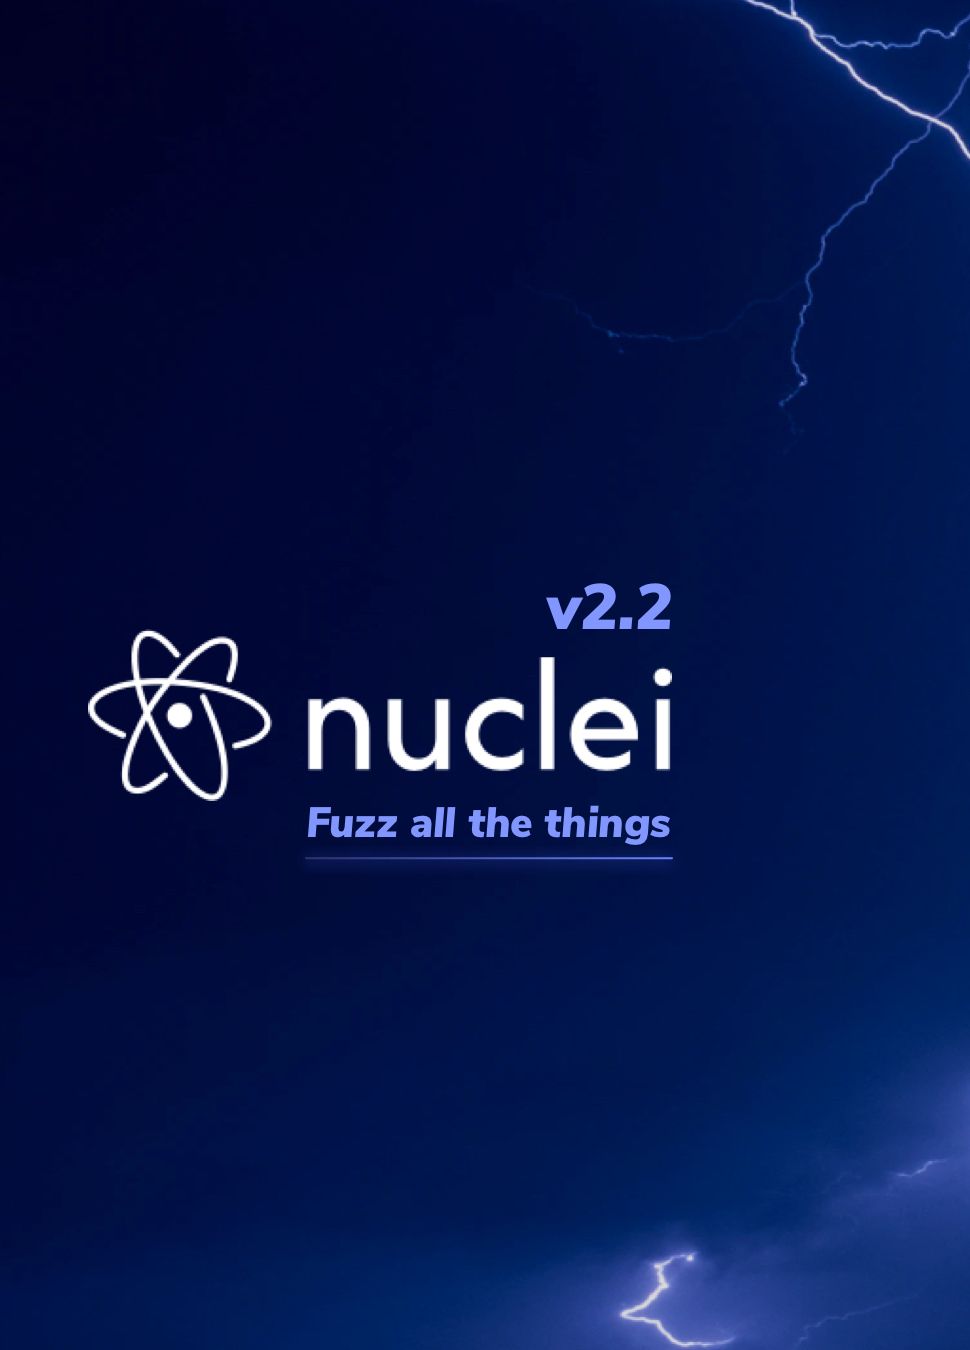 Nuclei - Fuzz all the things